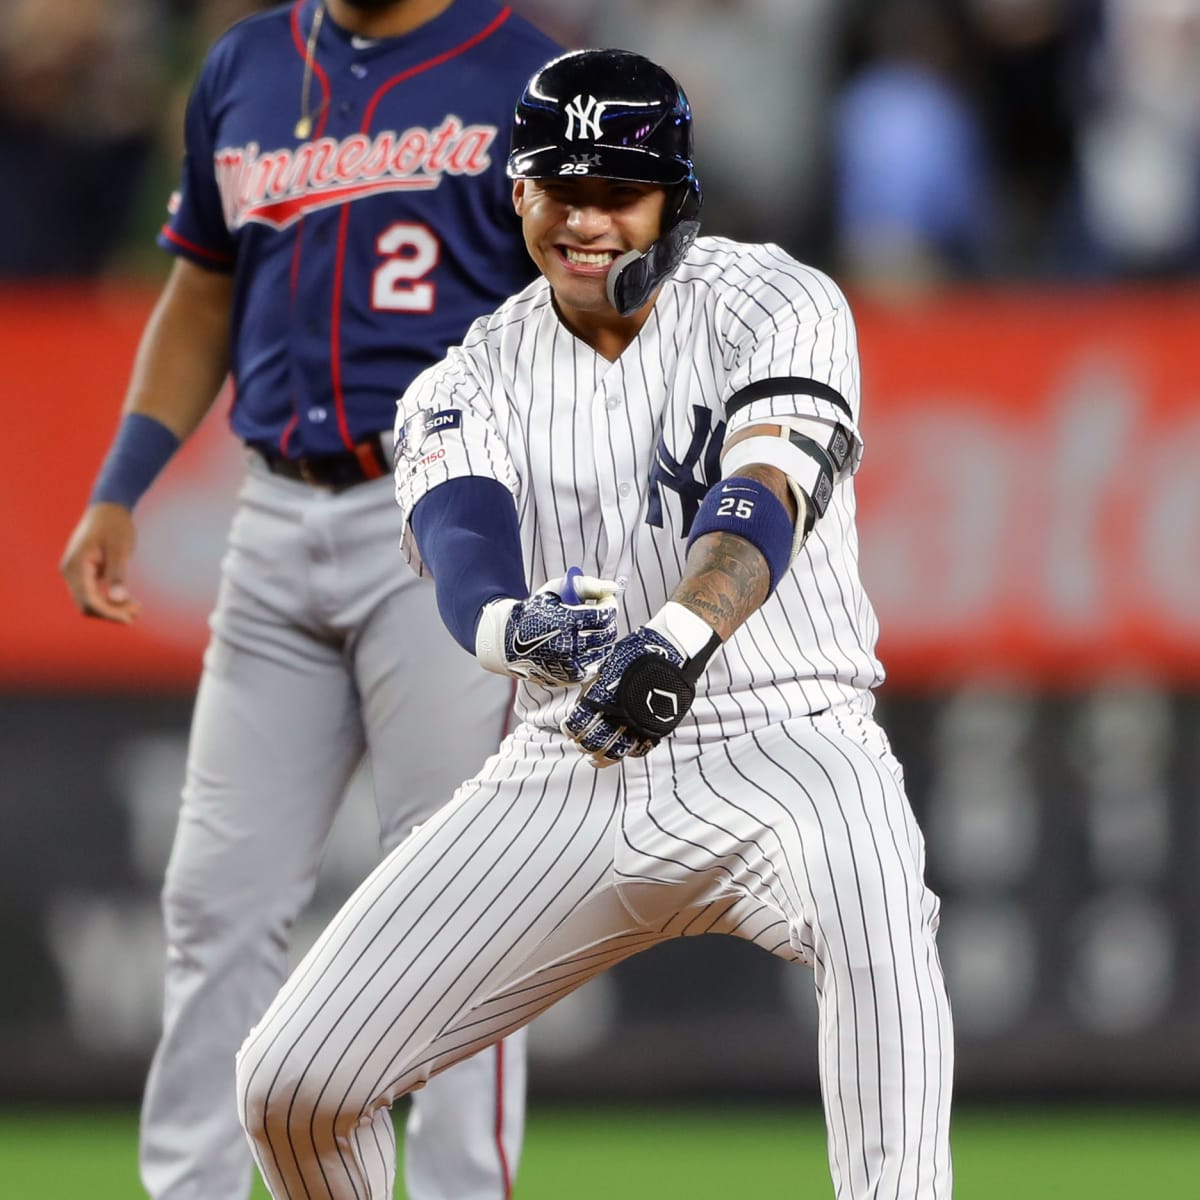 Yankees Riv infant yankees jersey alry Roundup: Twins nearly no